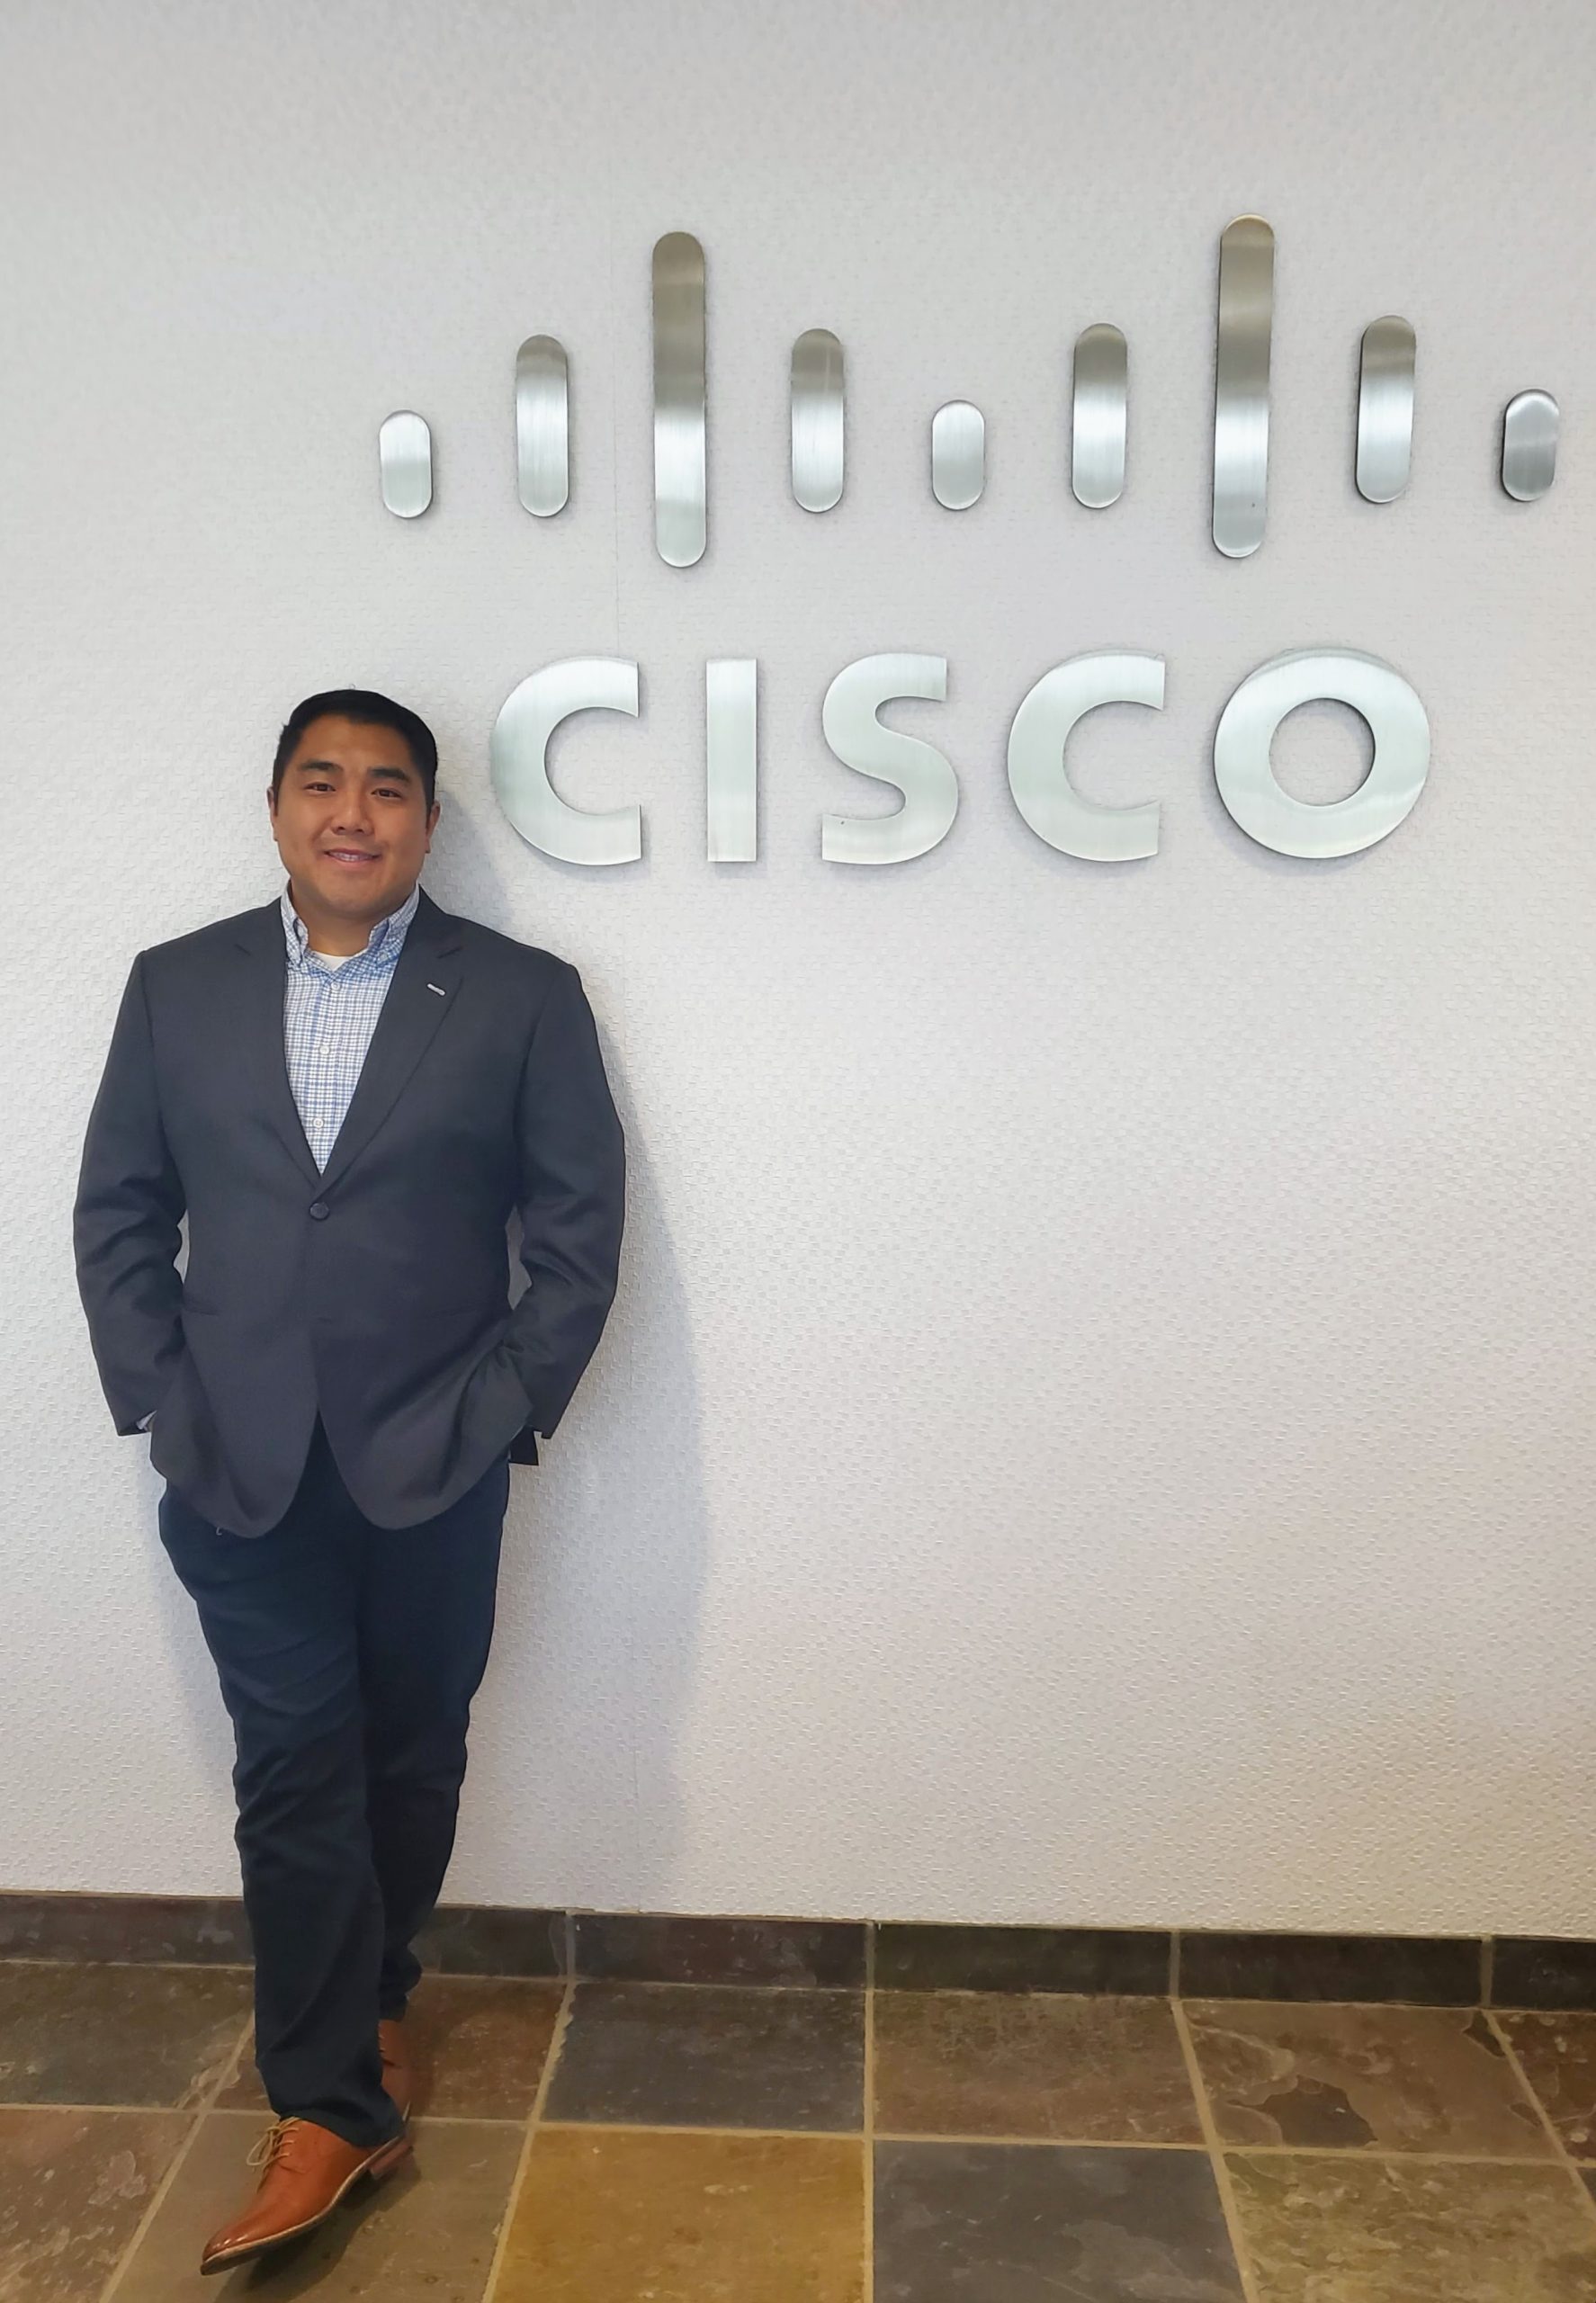 Jonathan wearing a suit and standing next to a Cisco sign.